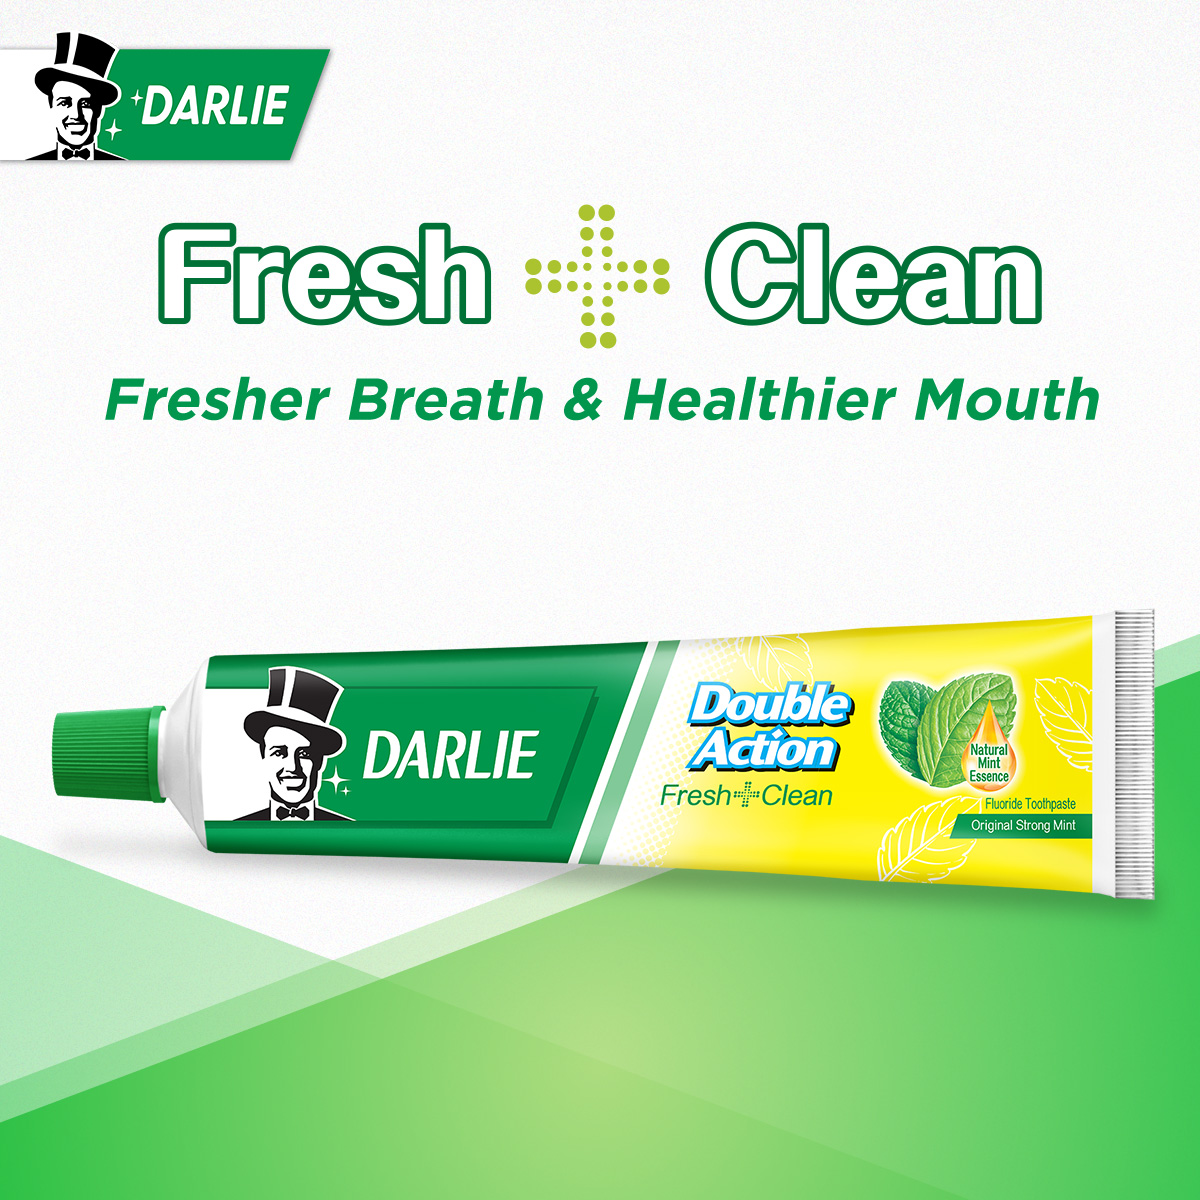 Darlie Double Action Fresh + Clean Toothpaste Original Strong Mint 250g